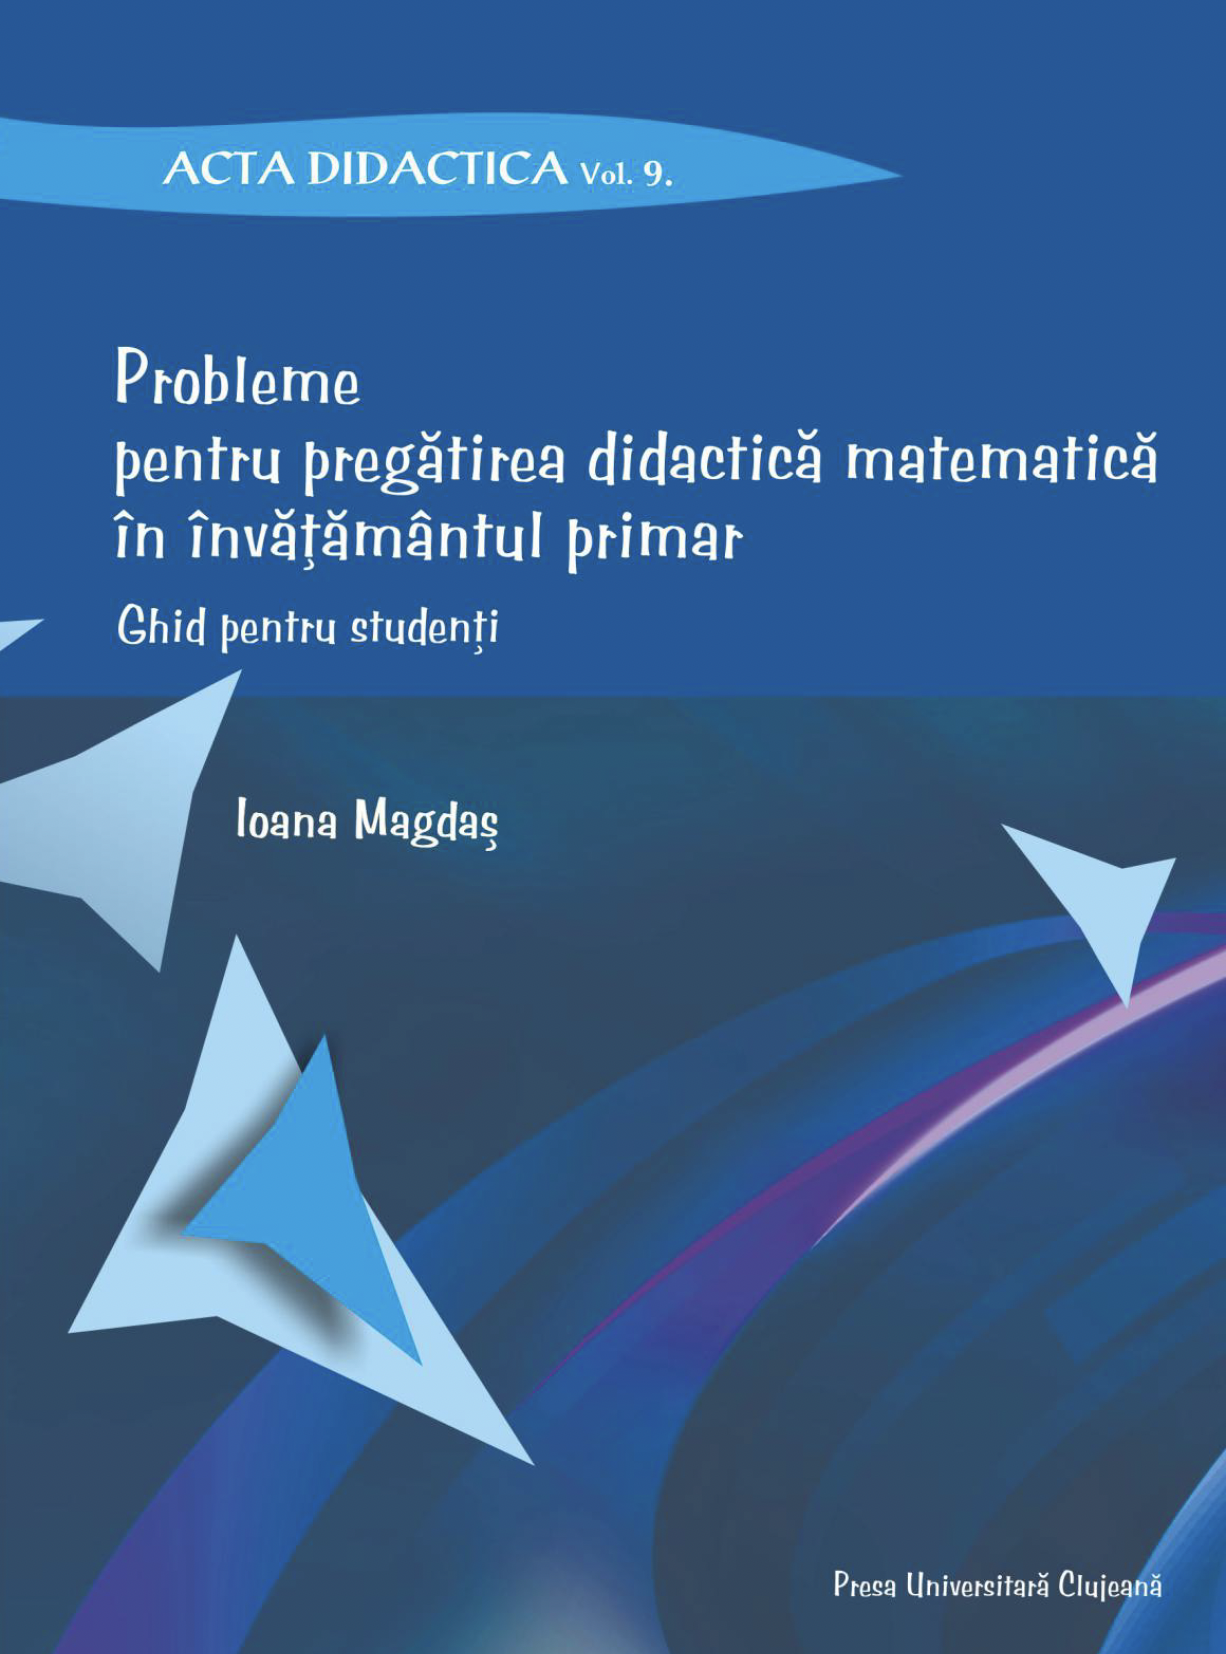 PROBLEMS FOR TEACHING MATHEMATICS IN PRIMARY EDUCATION. GUIDE FOR STUDENTS